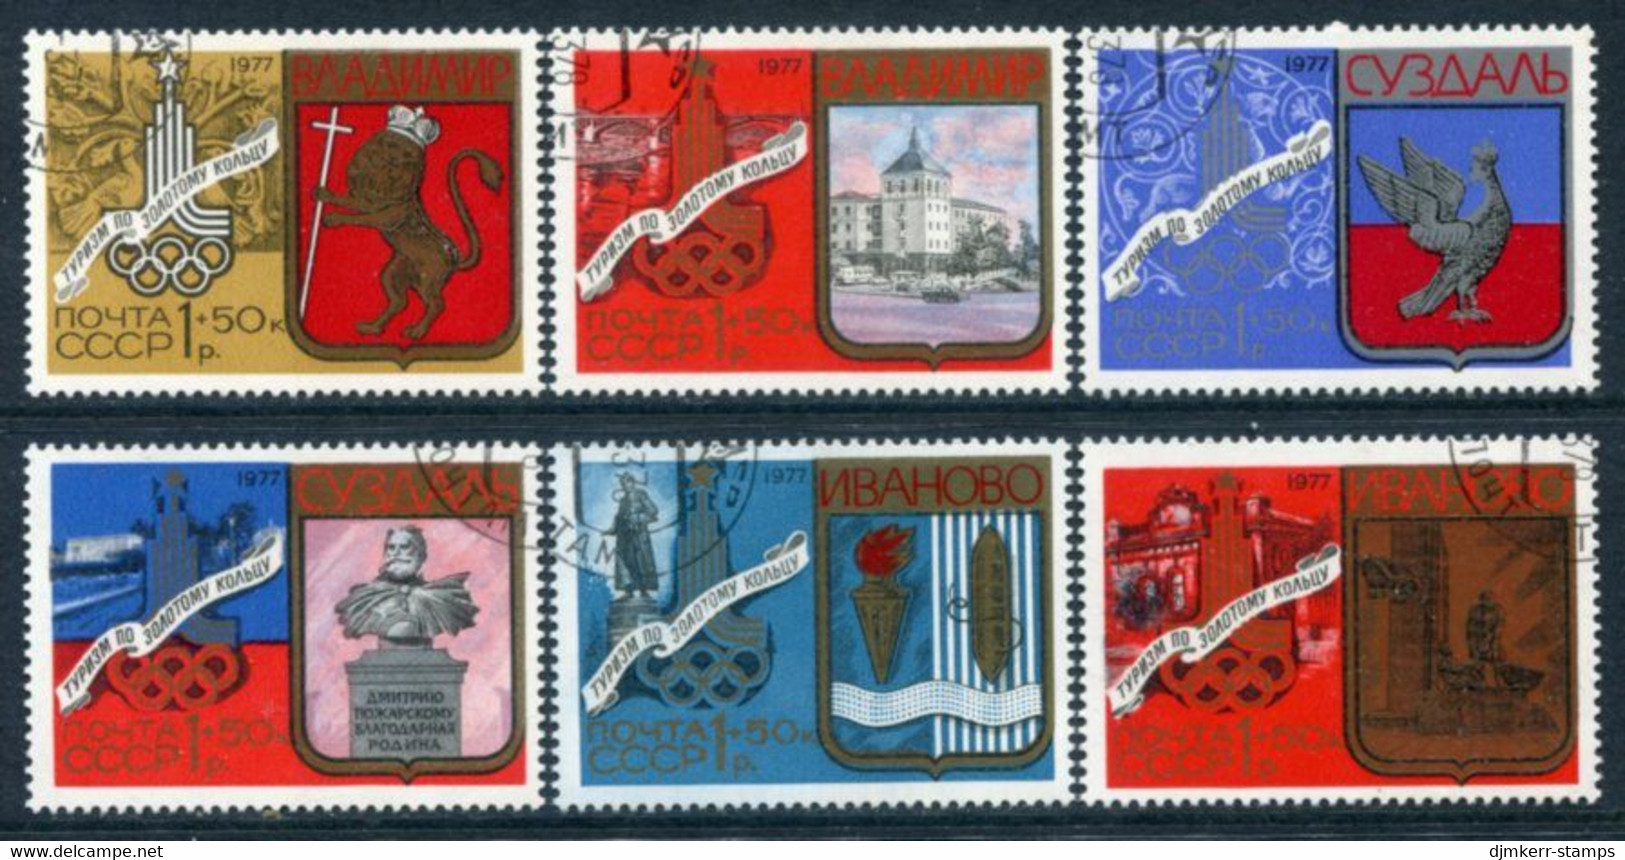 SOVIET UNION 1977 Moscow Olympics 1980: Cities Of The Golden Ring I Used.  Michel 4686-91 - Used Stamps